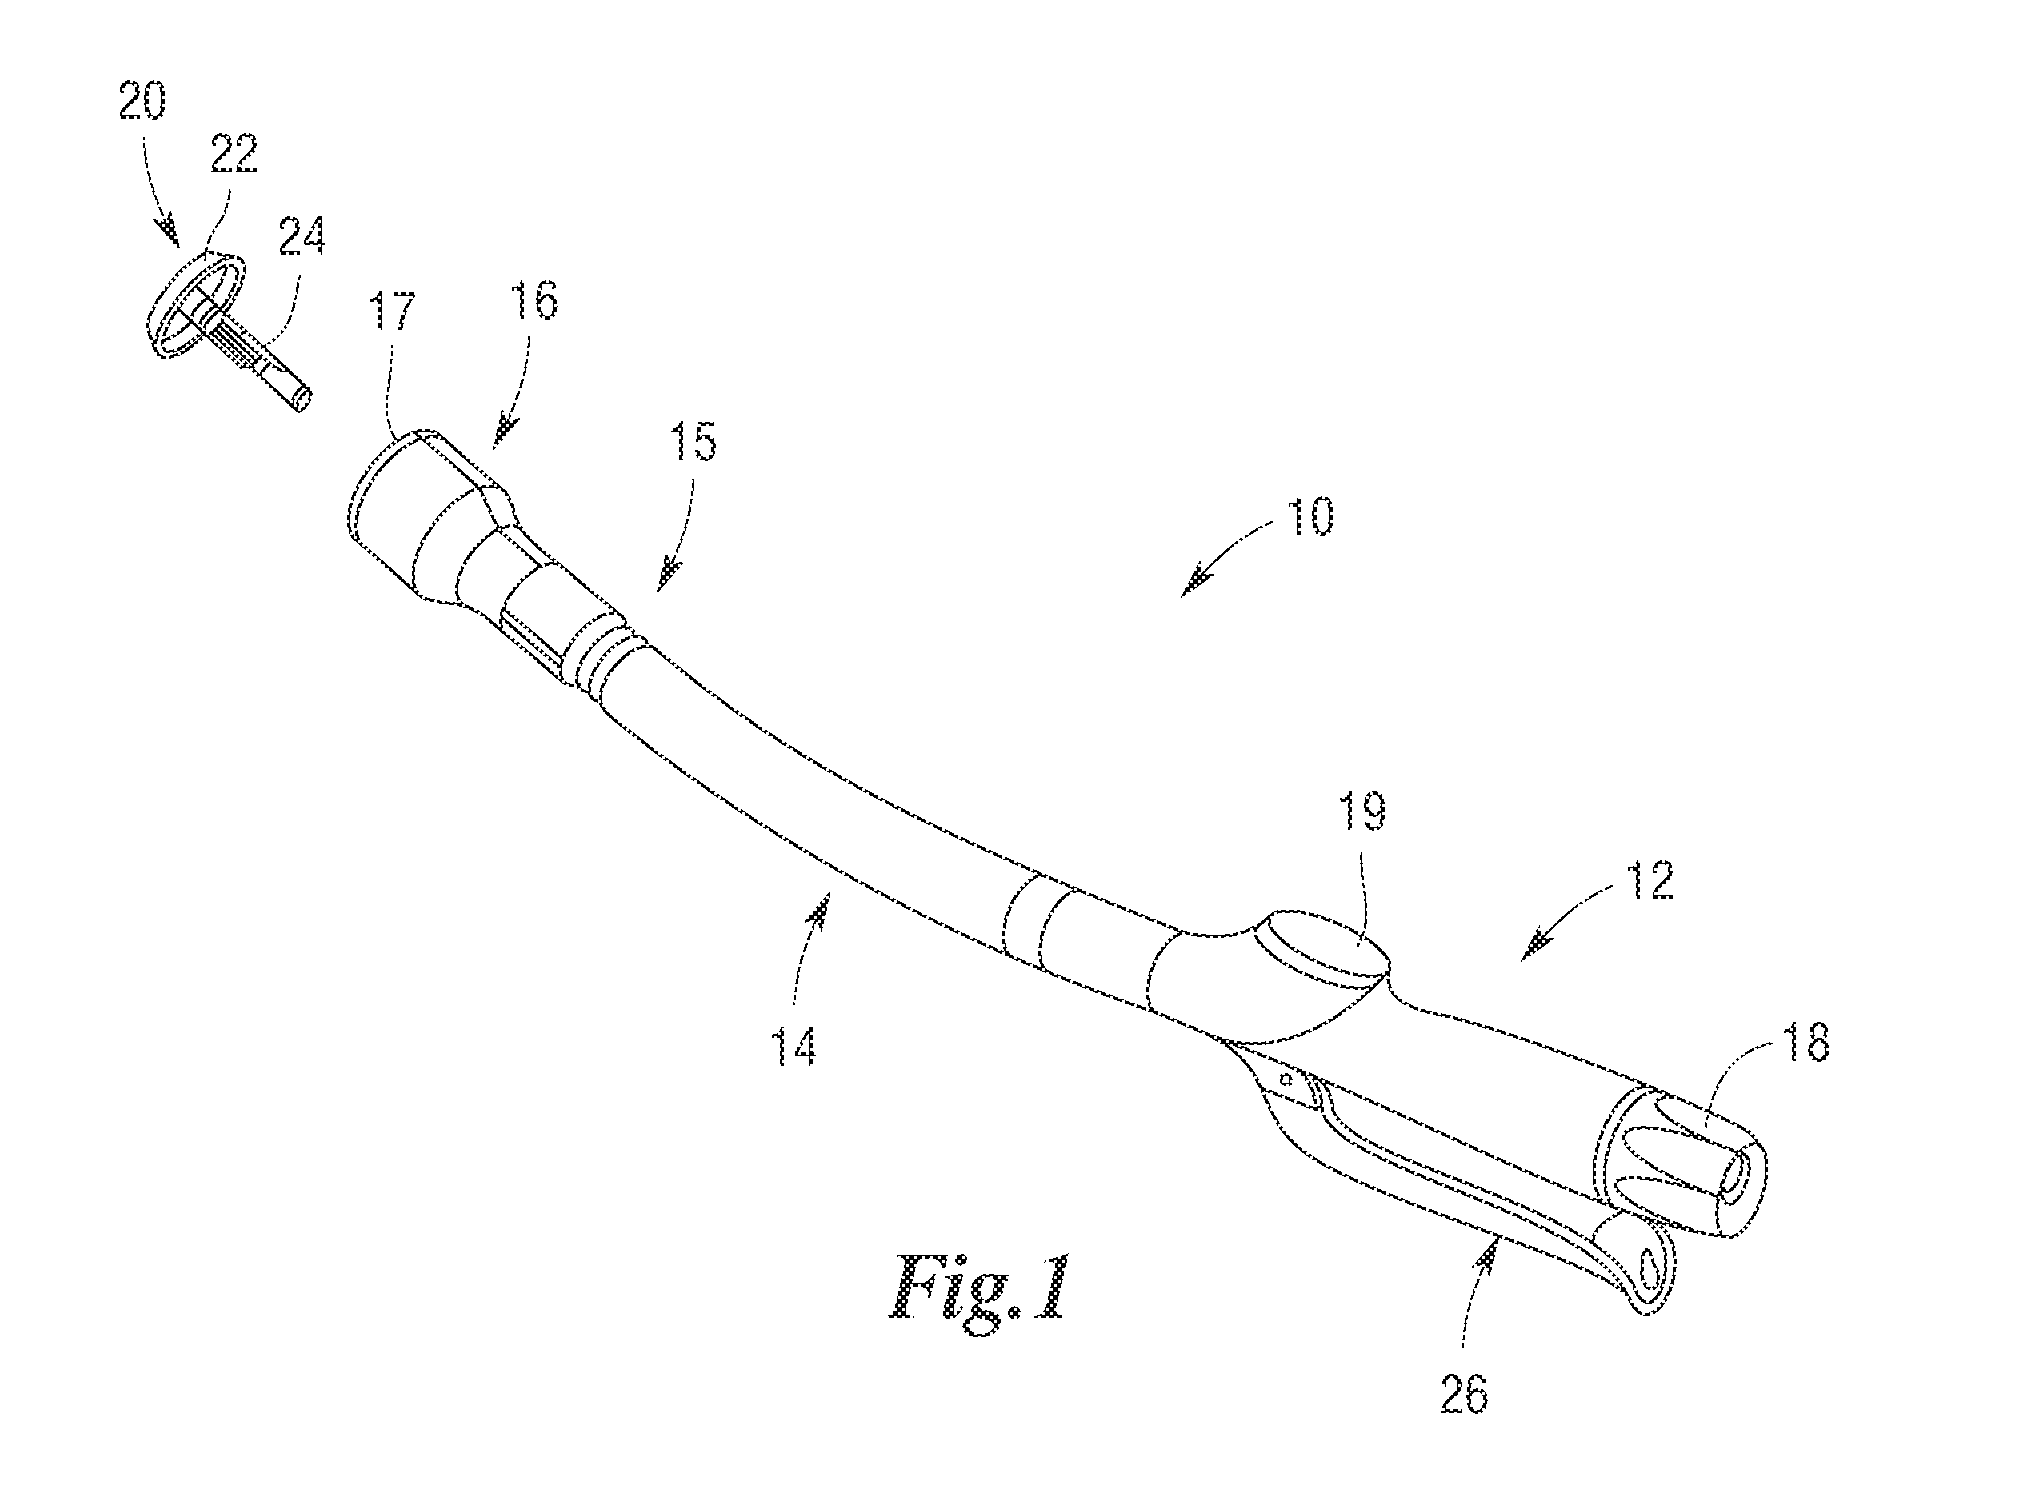 Devices and methods for introducing a surgical circular stapling instrument into a patient